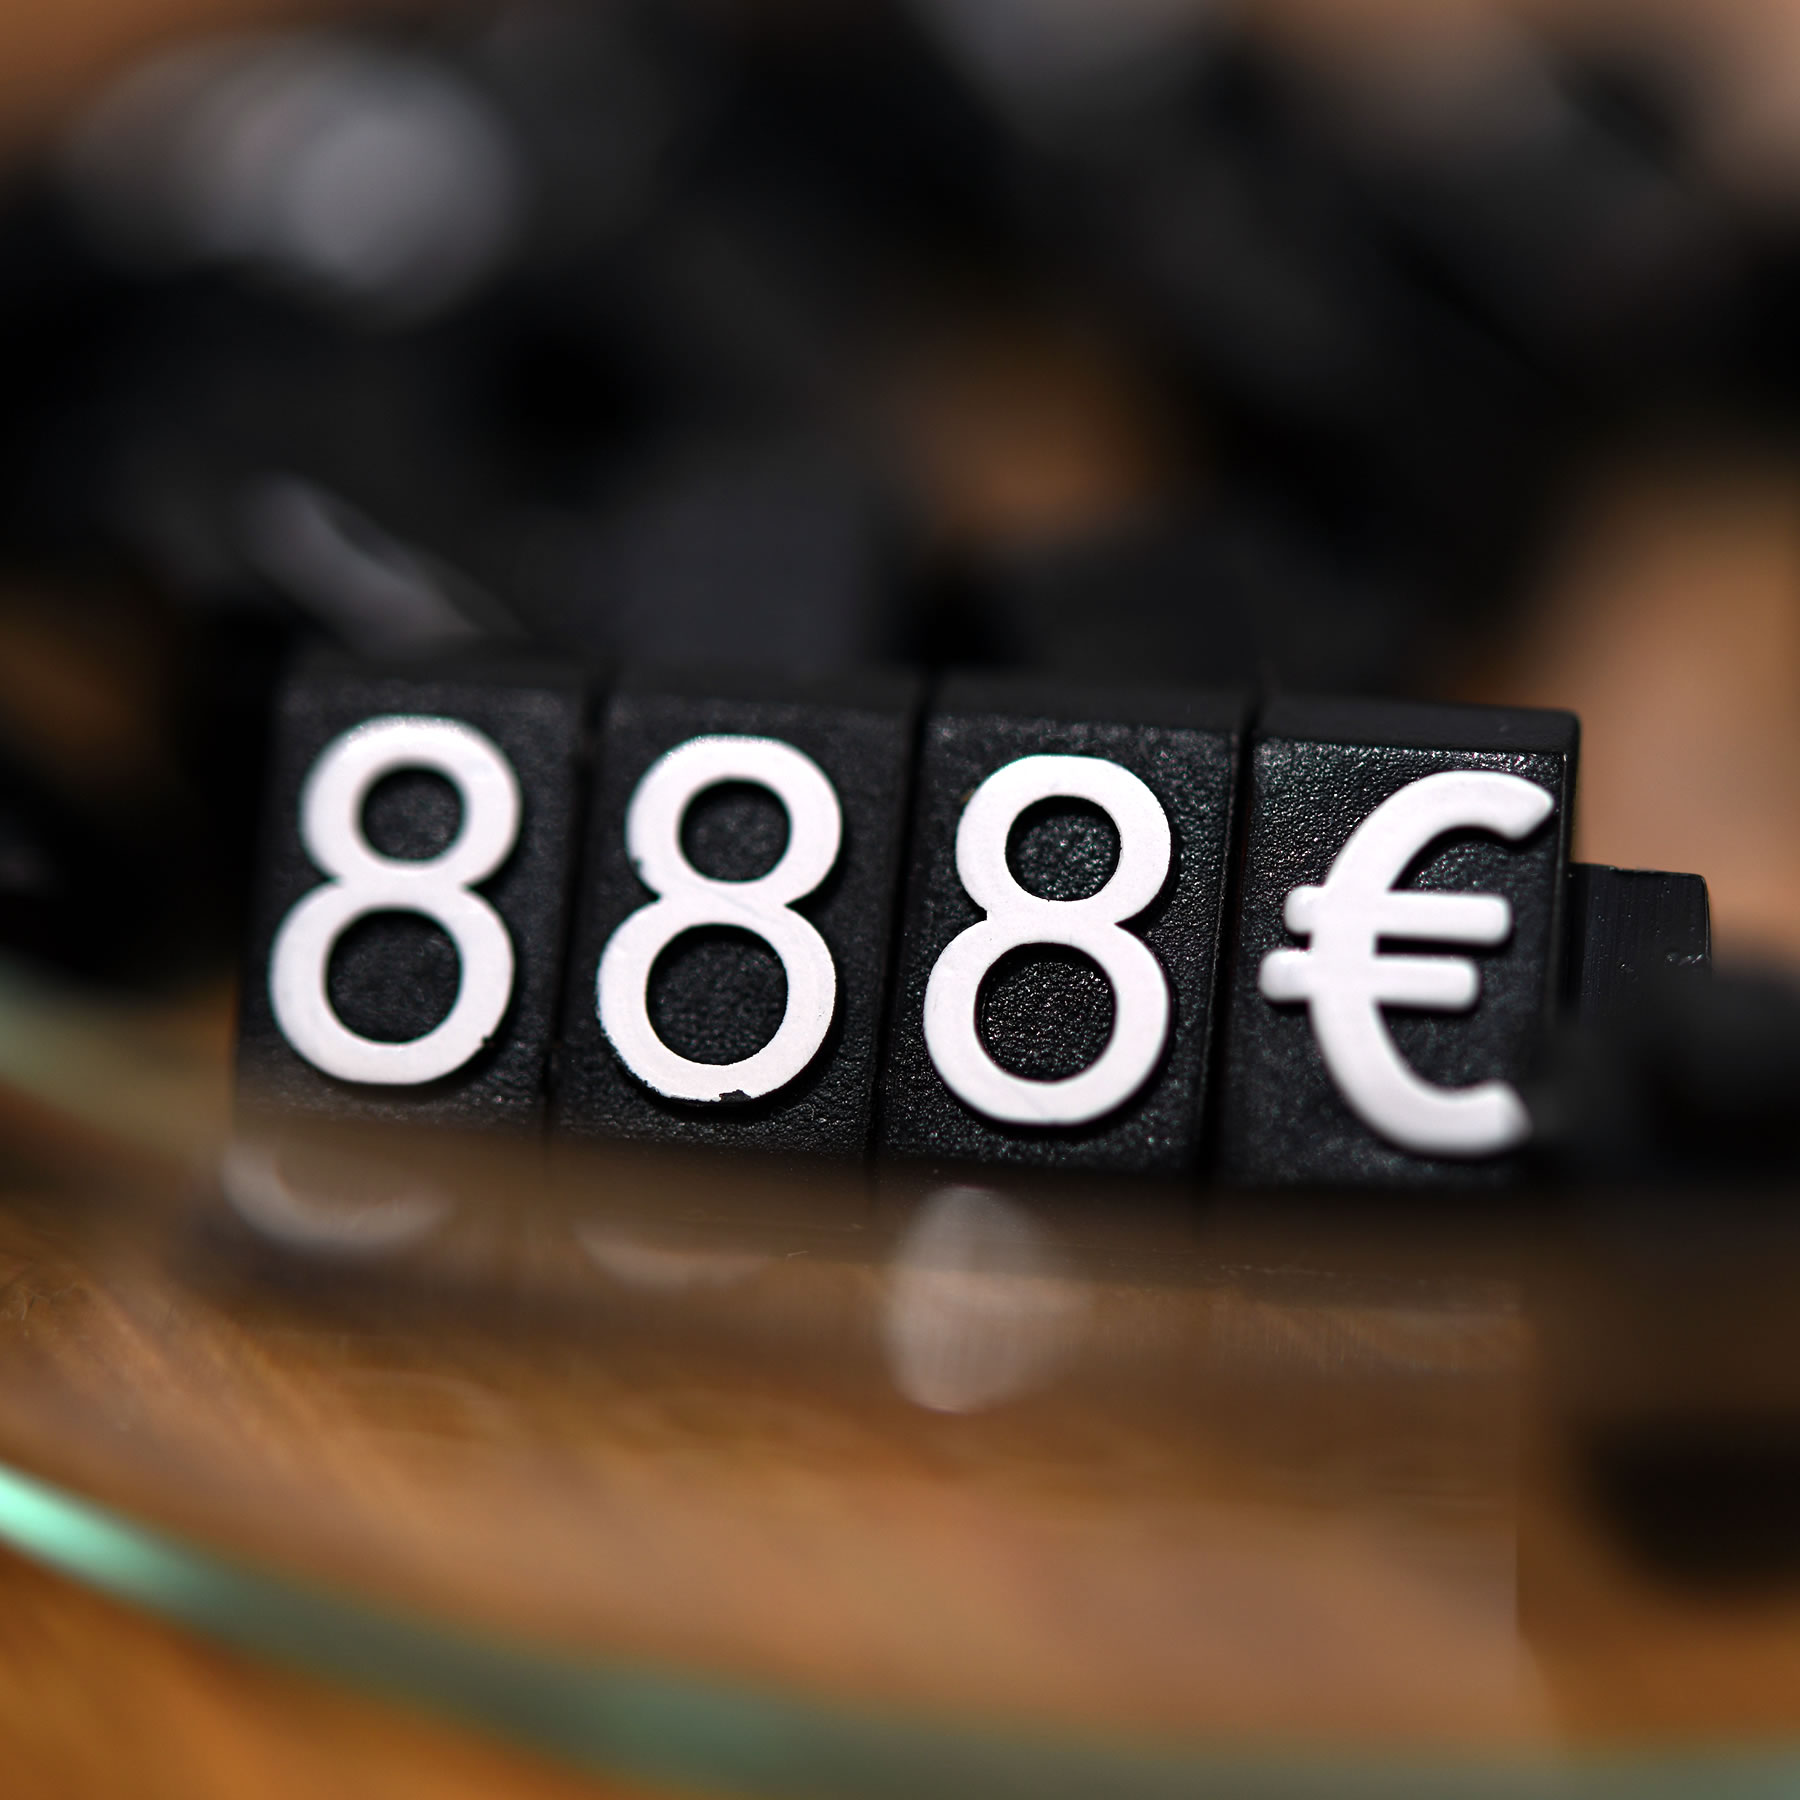 price tag that shows 888 euro